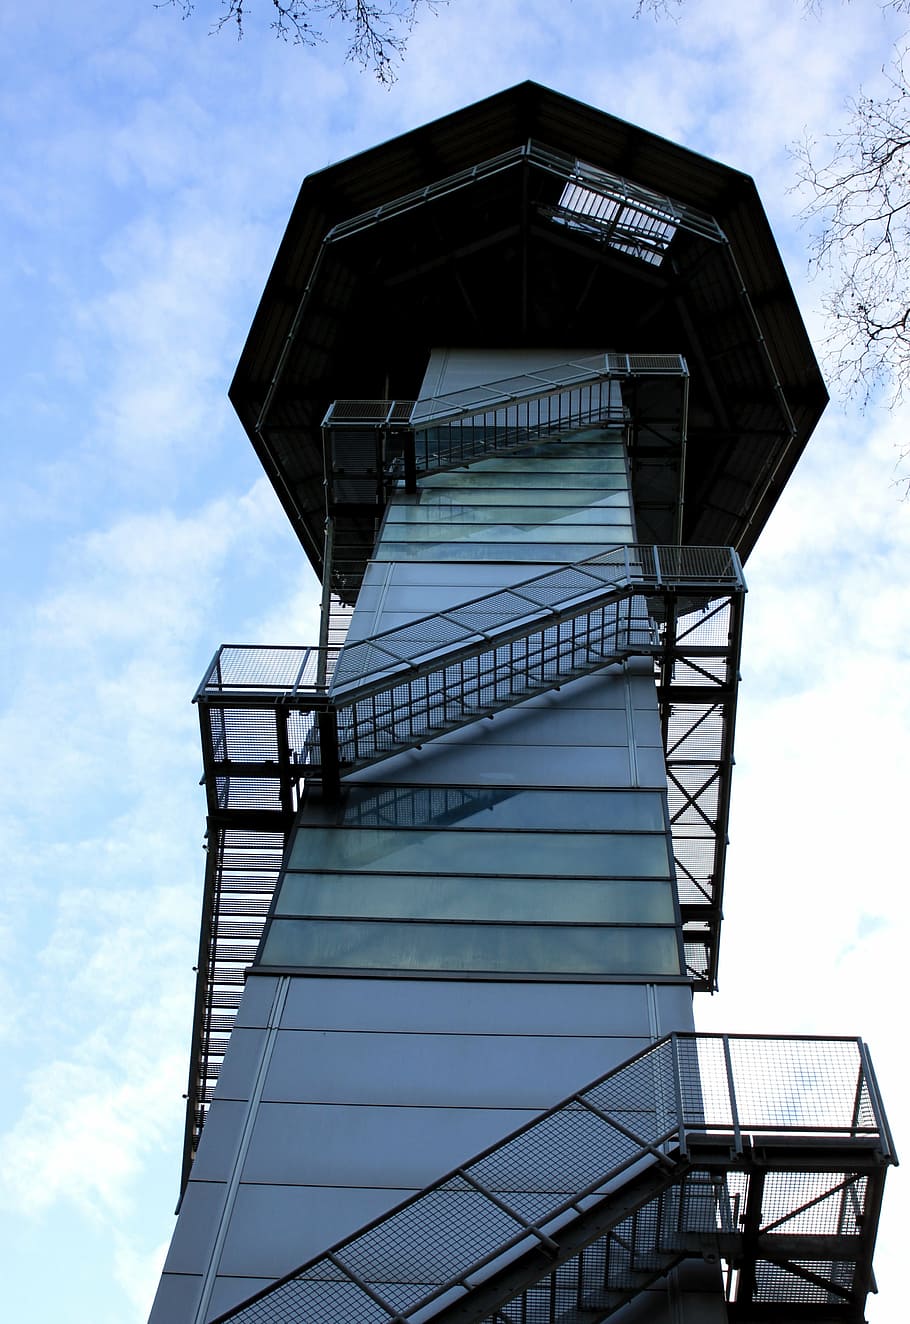 observation tower, tower, platform, building, watching tower, high, stairs, upgrade, gradually, railing